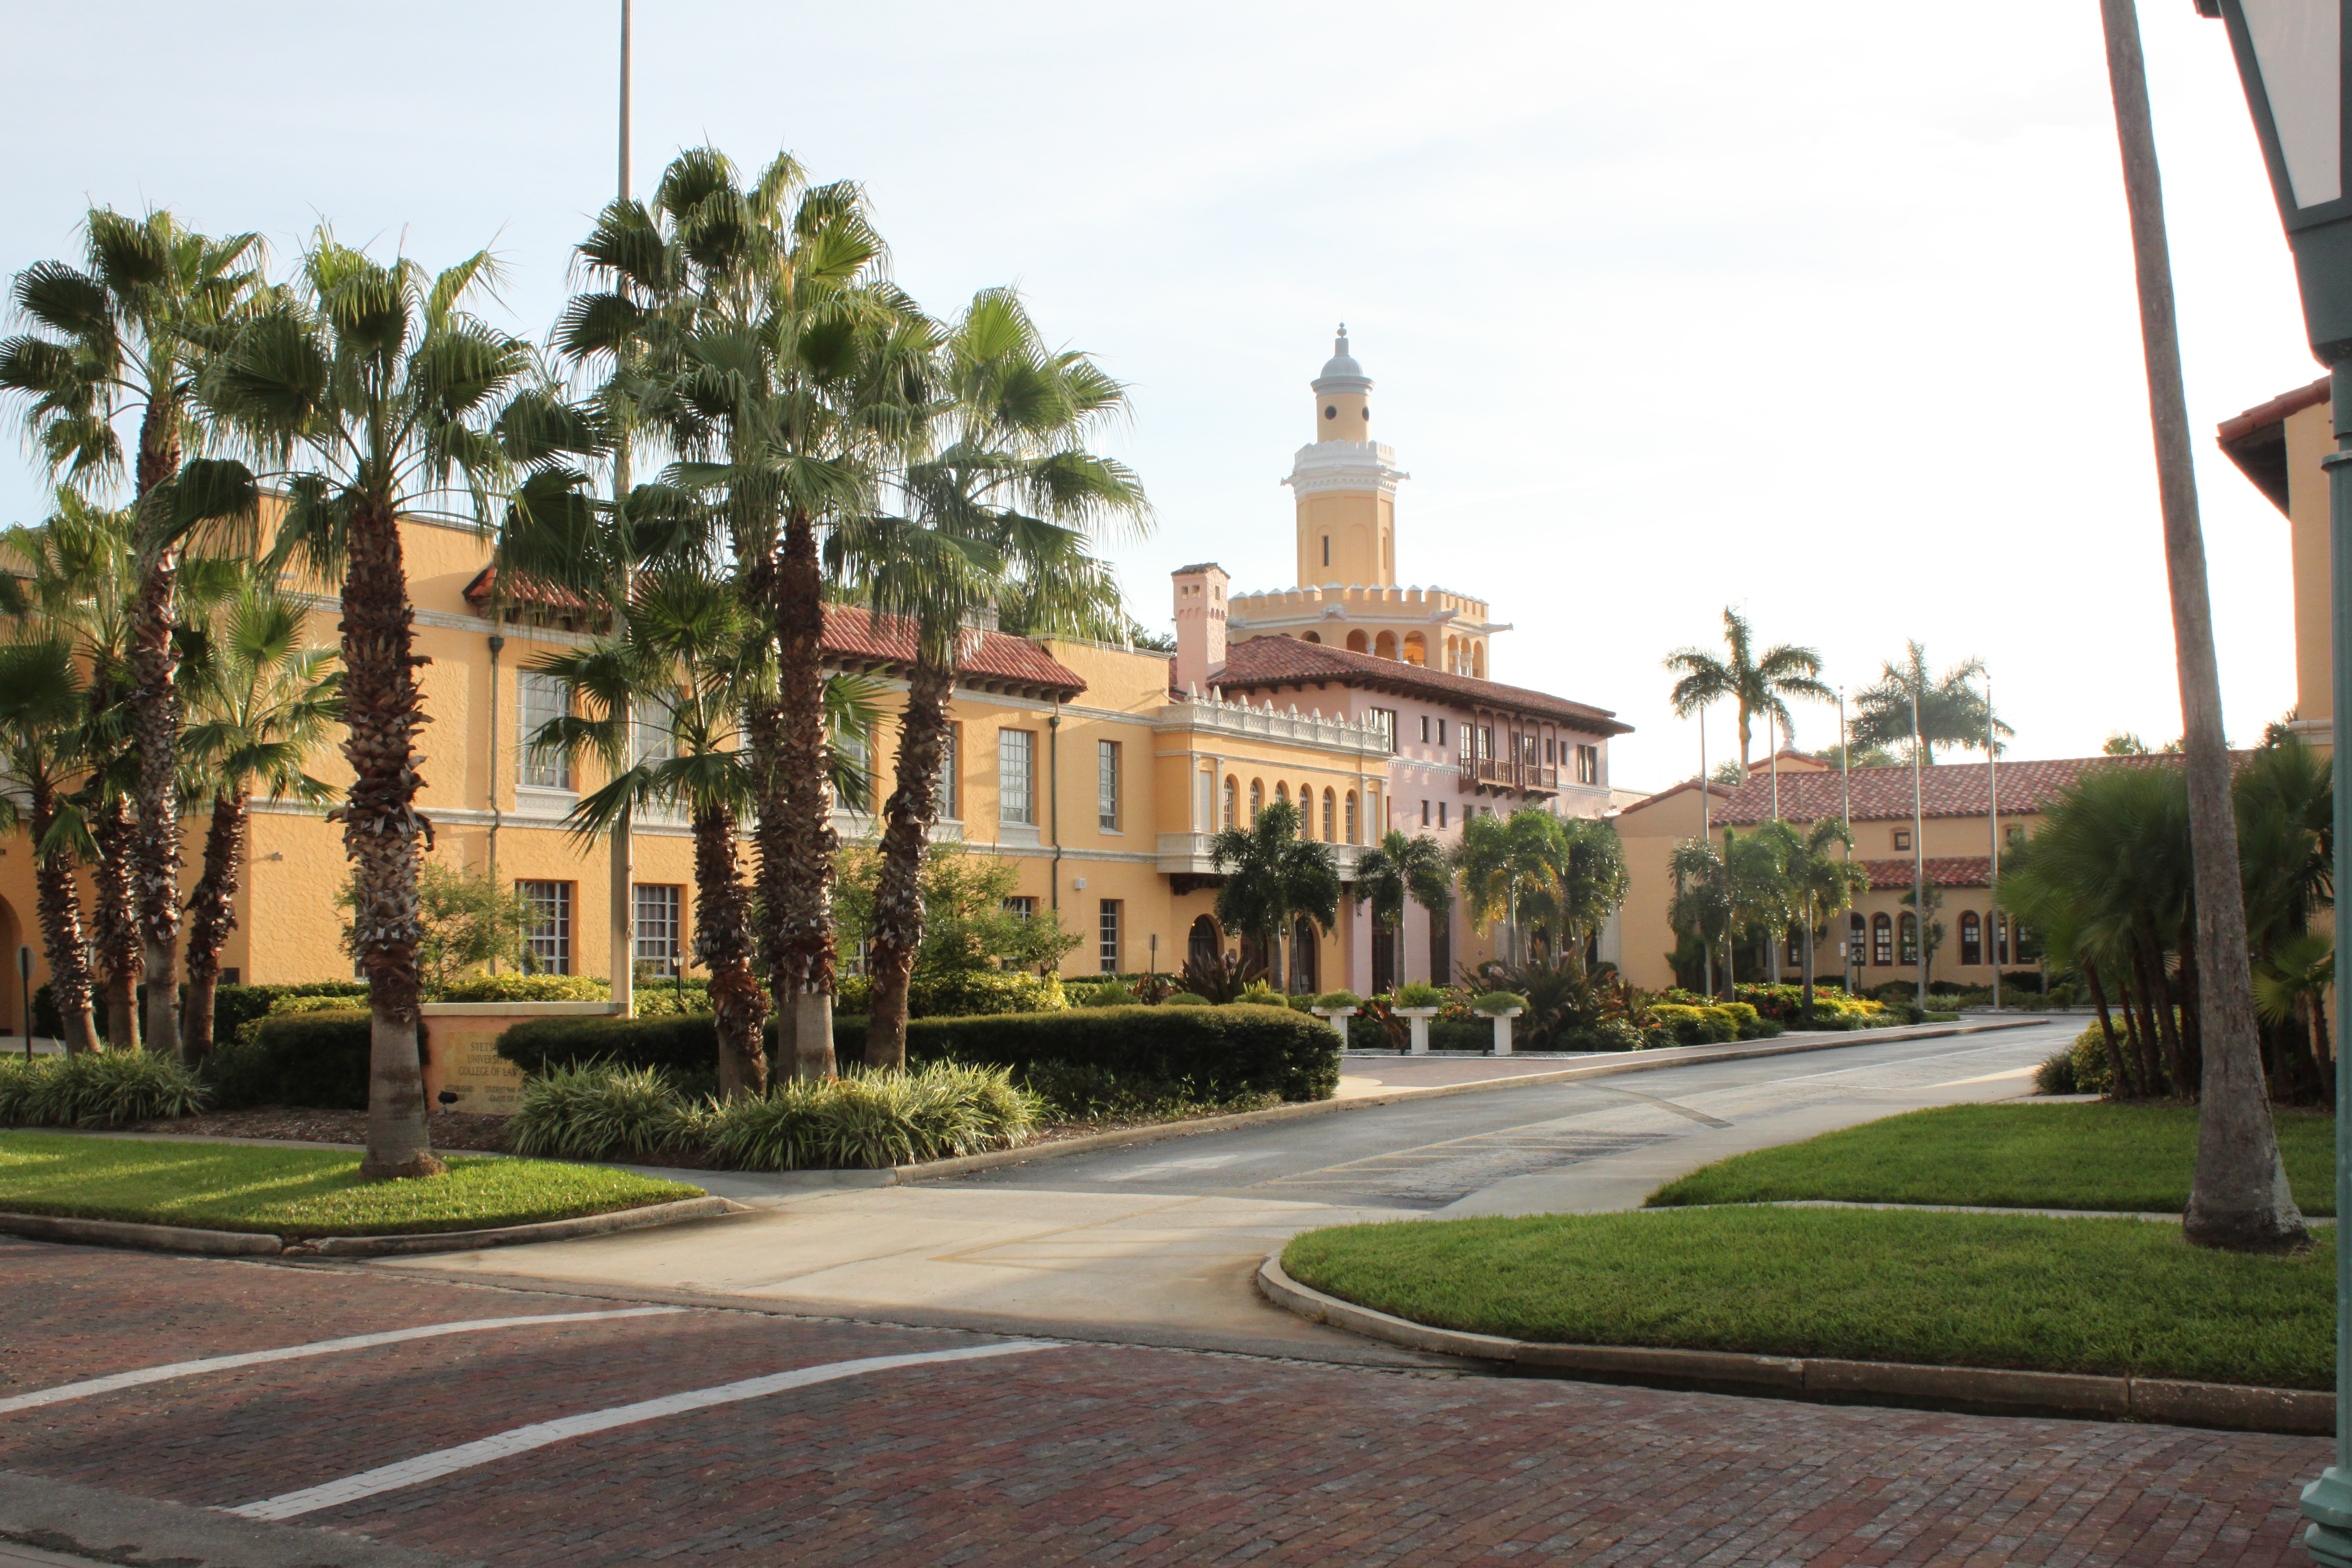 Stetson University College of Law